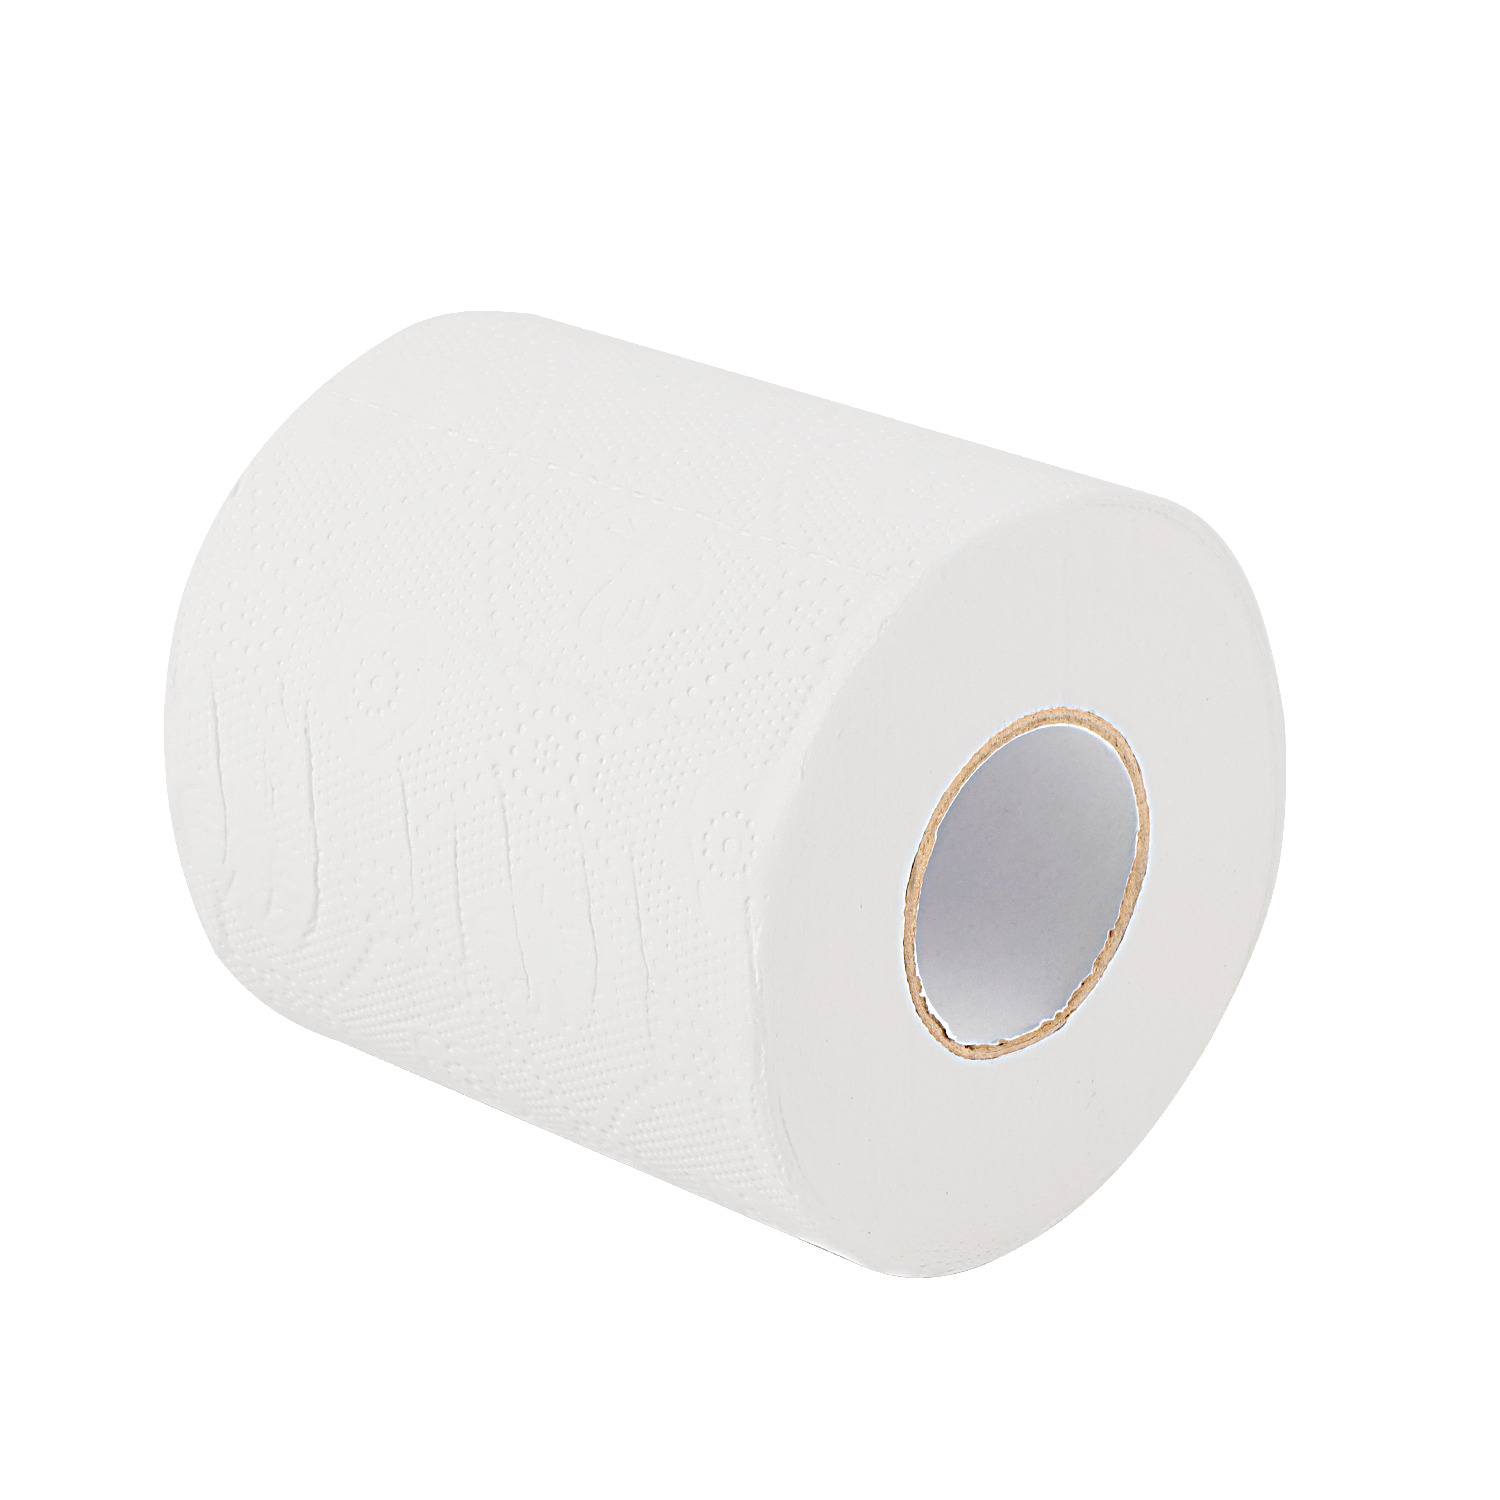 Embossed Toilet Tissue 3Ply 240sheets/roll 48pack - Stanley Packaging